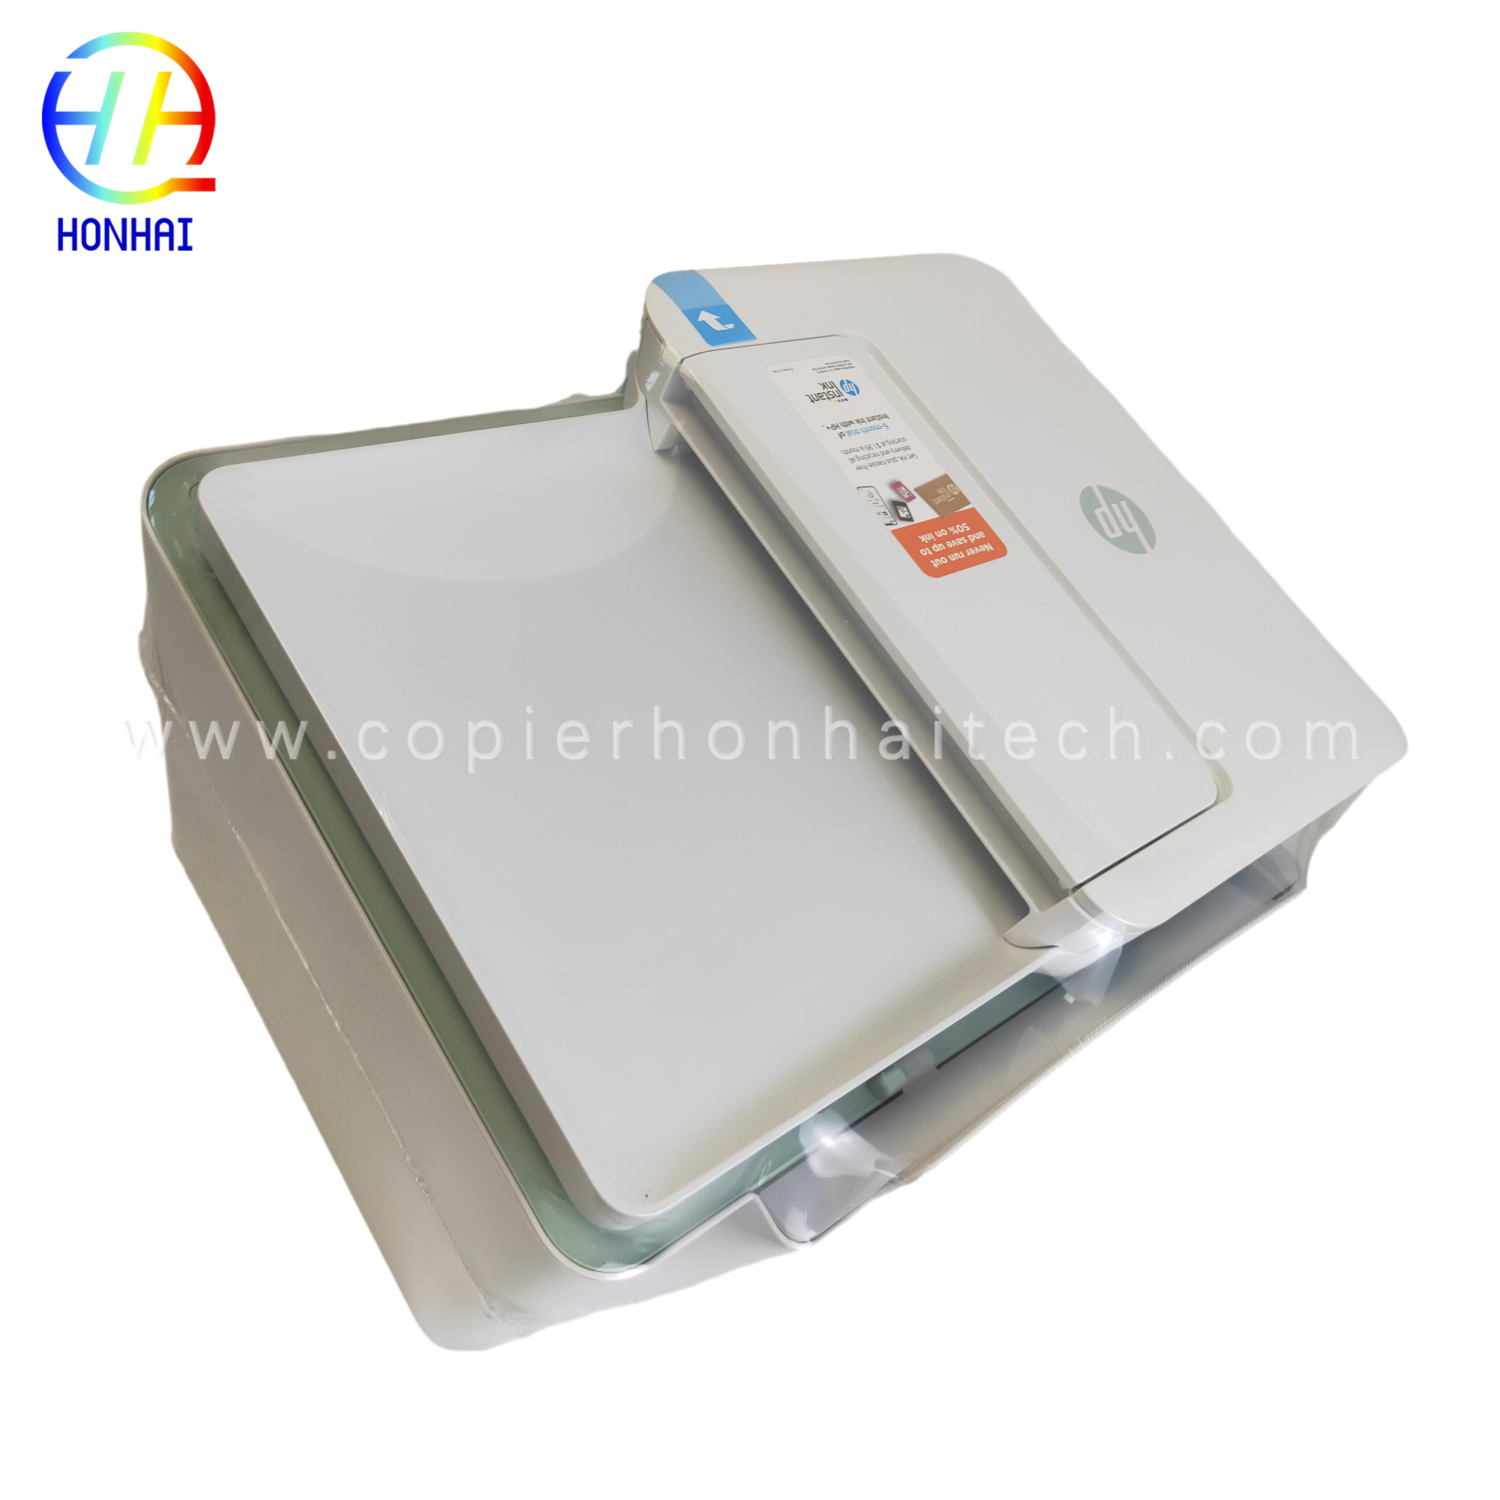 https://www.copierhonhaitech.com/original-new-wireless-printer-for-hp-deskjet-4122e-all-in-one-printer-scan-and-copy-home-office-students-and-home-printer-26q96a-product/